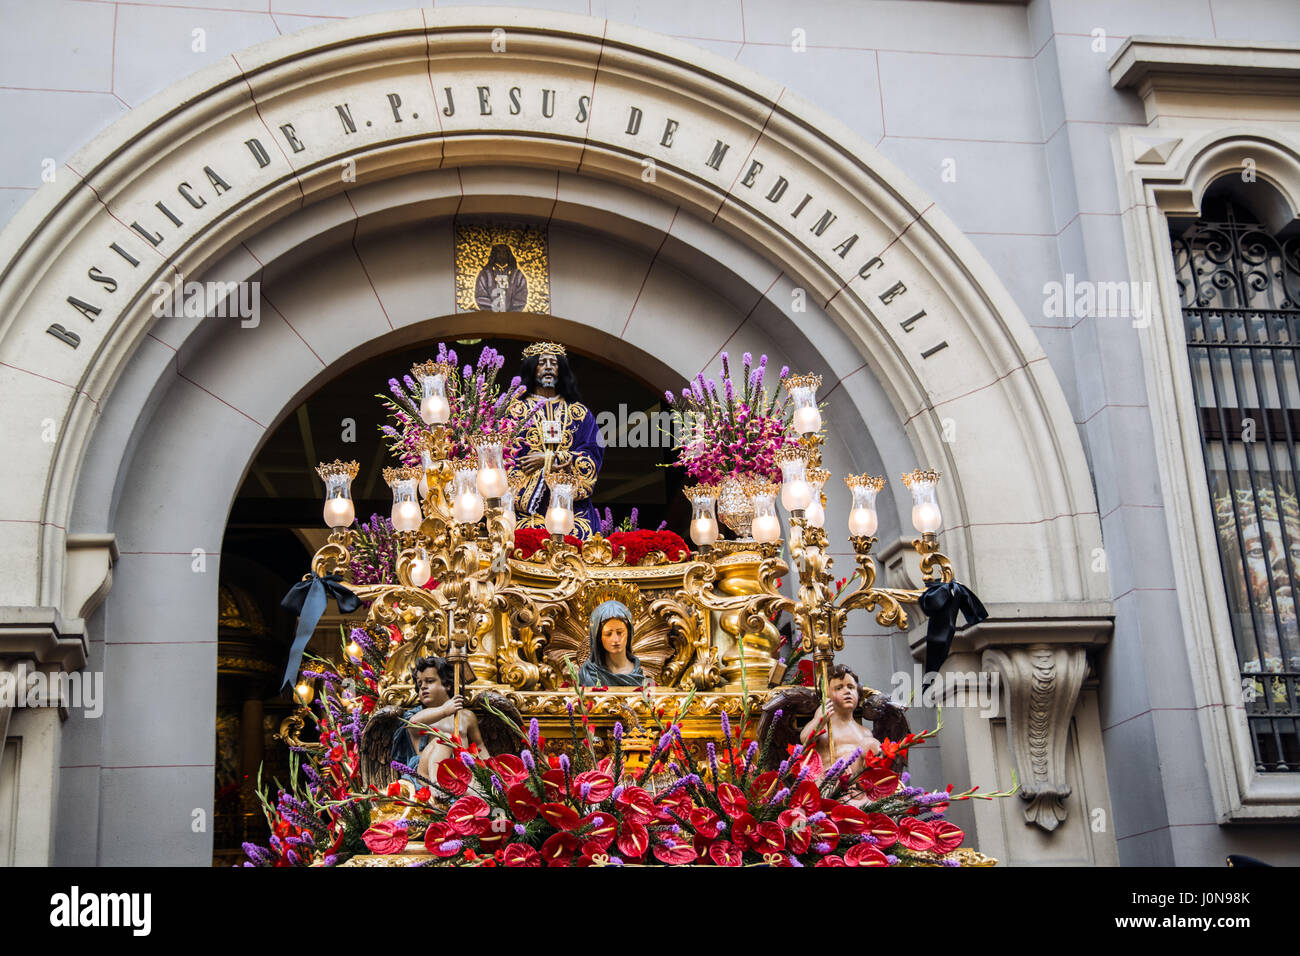 Madrid, Spain. 14th Apr, 2017. Jesus de Medinaceli image coming out of the church for the procession of Good Friday Credit: Marcos del Mazo/Alamy Live News Stock Photo